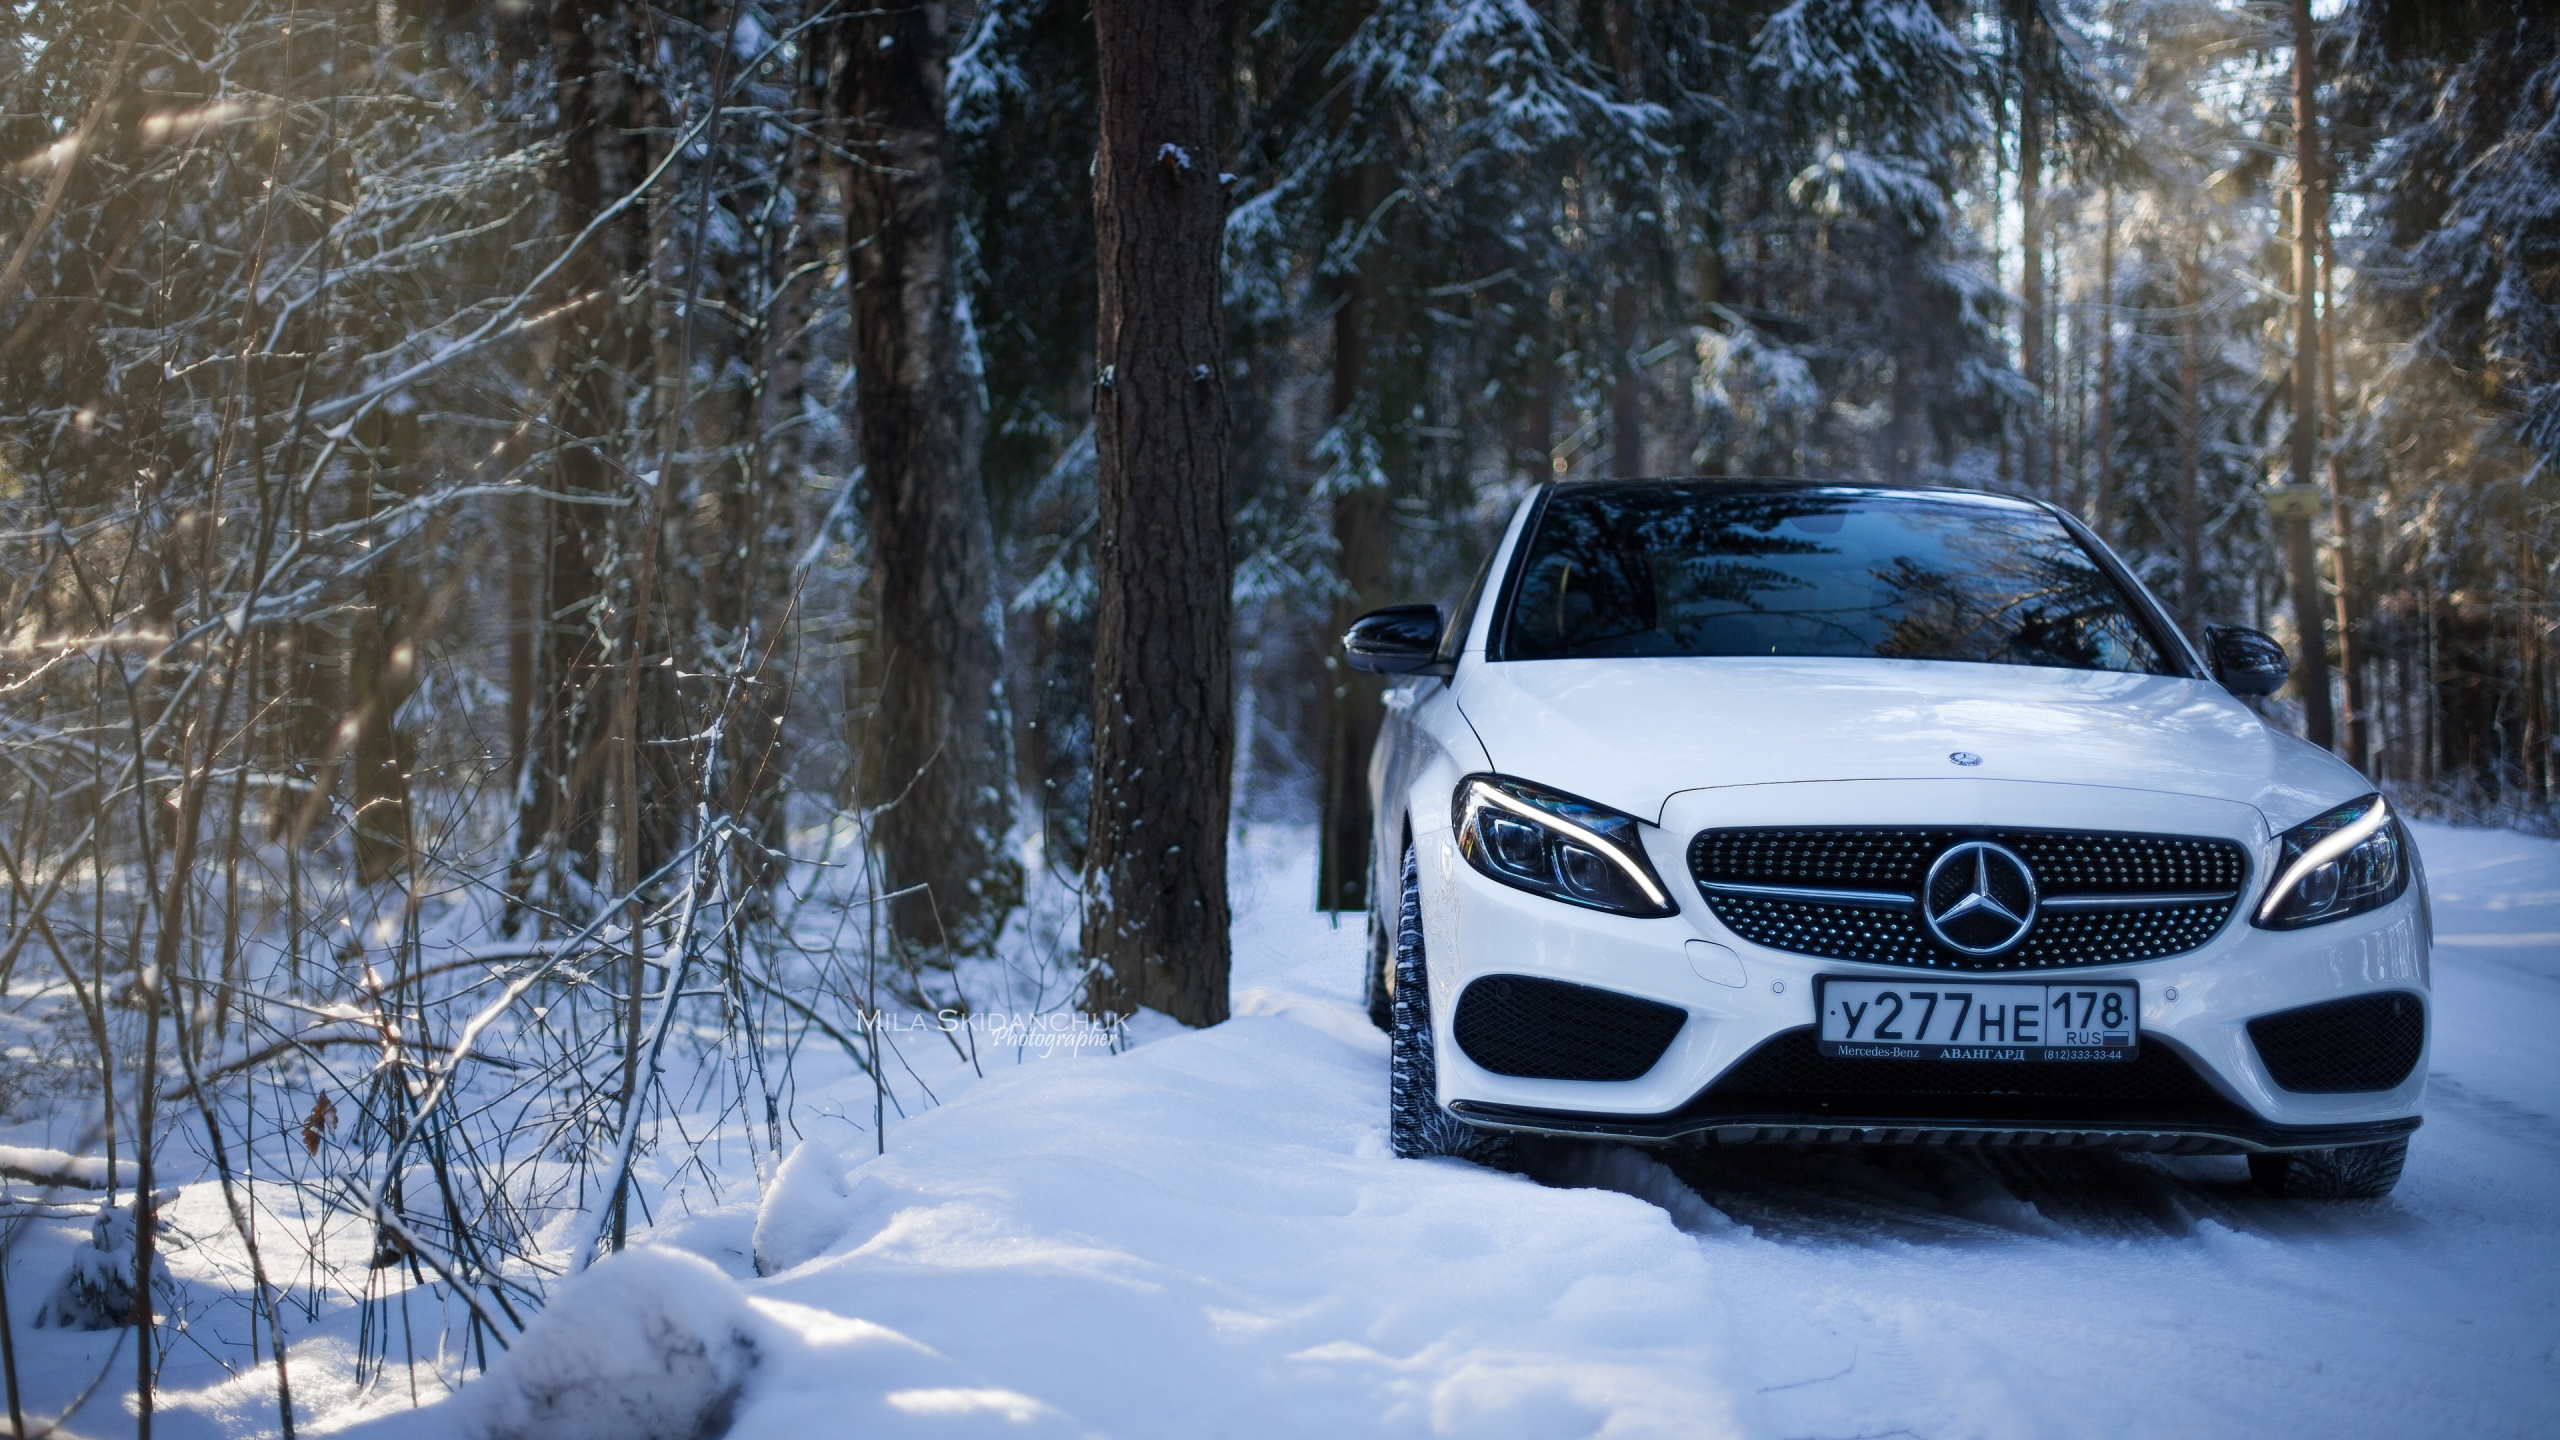 White Mercedes Benz Car on Snow Covered Ground. Wallpaper in 2560x1440 Resolution